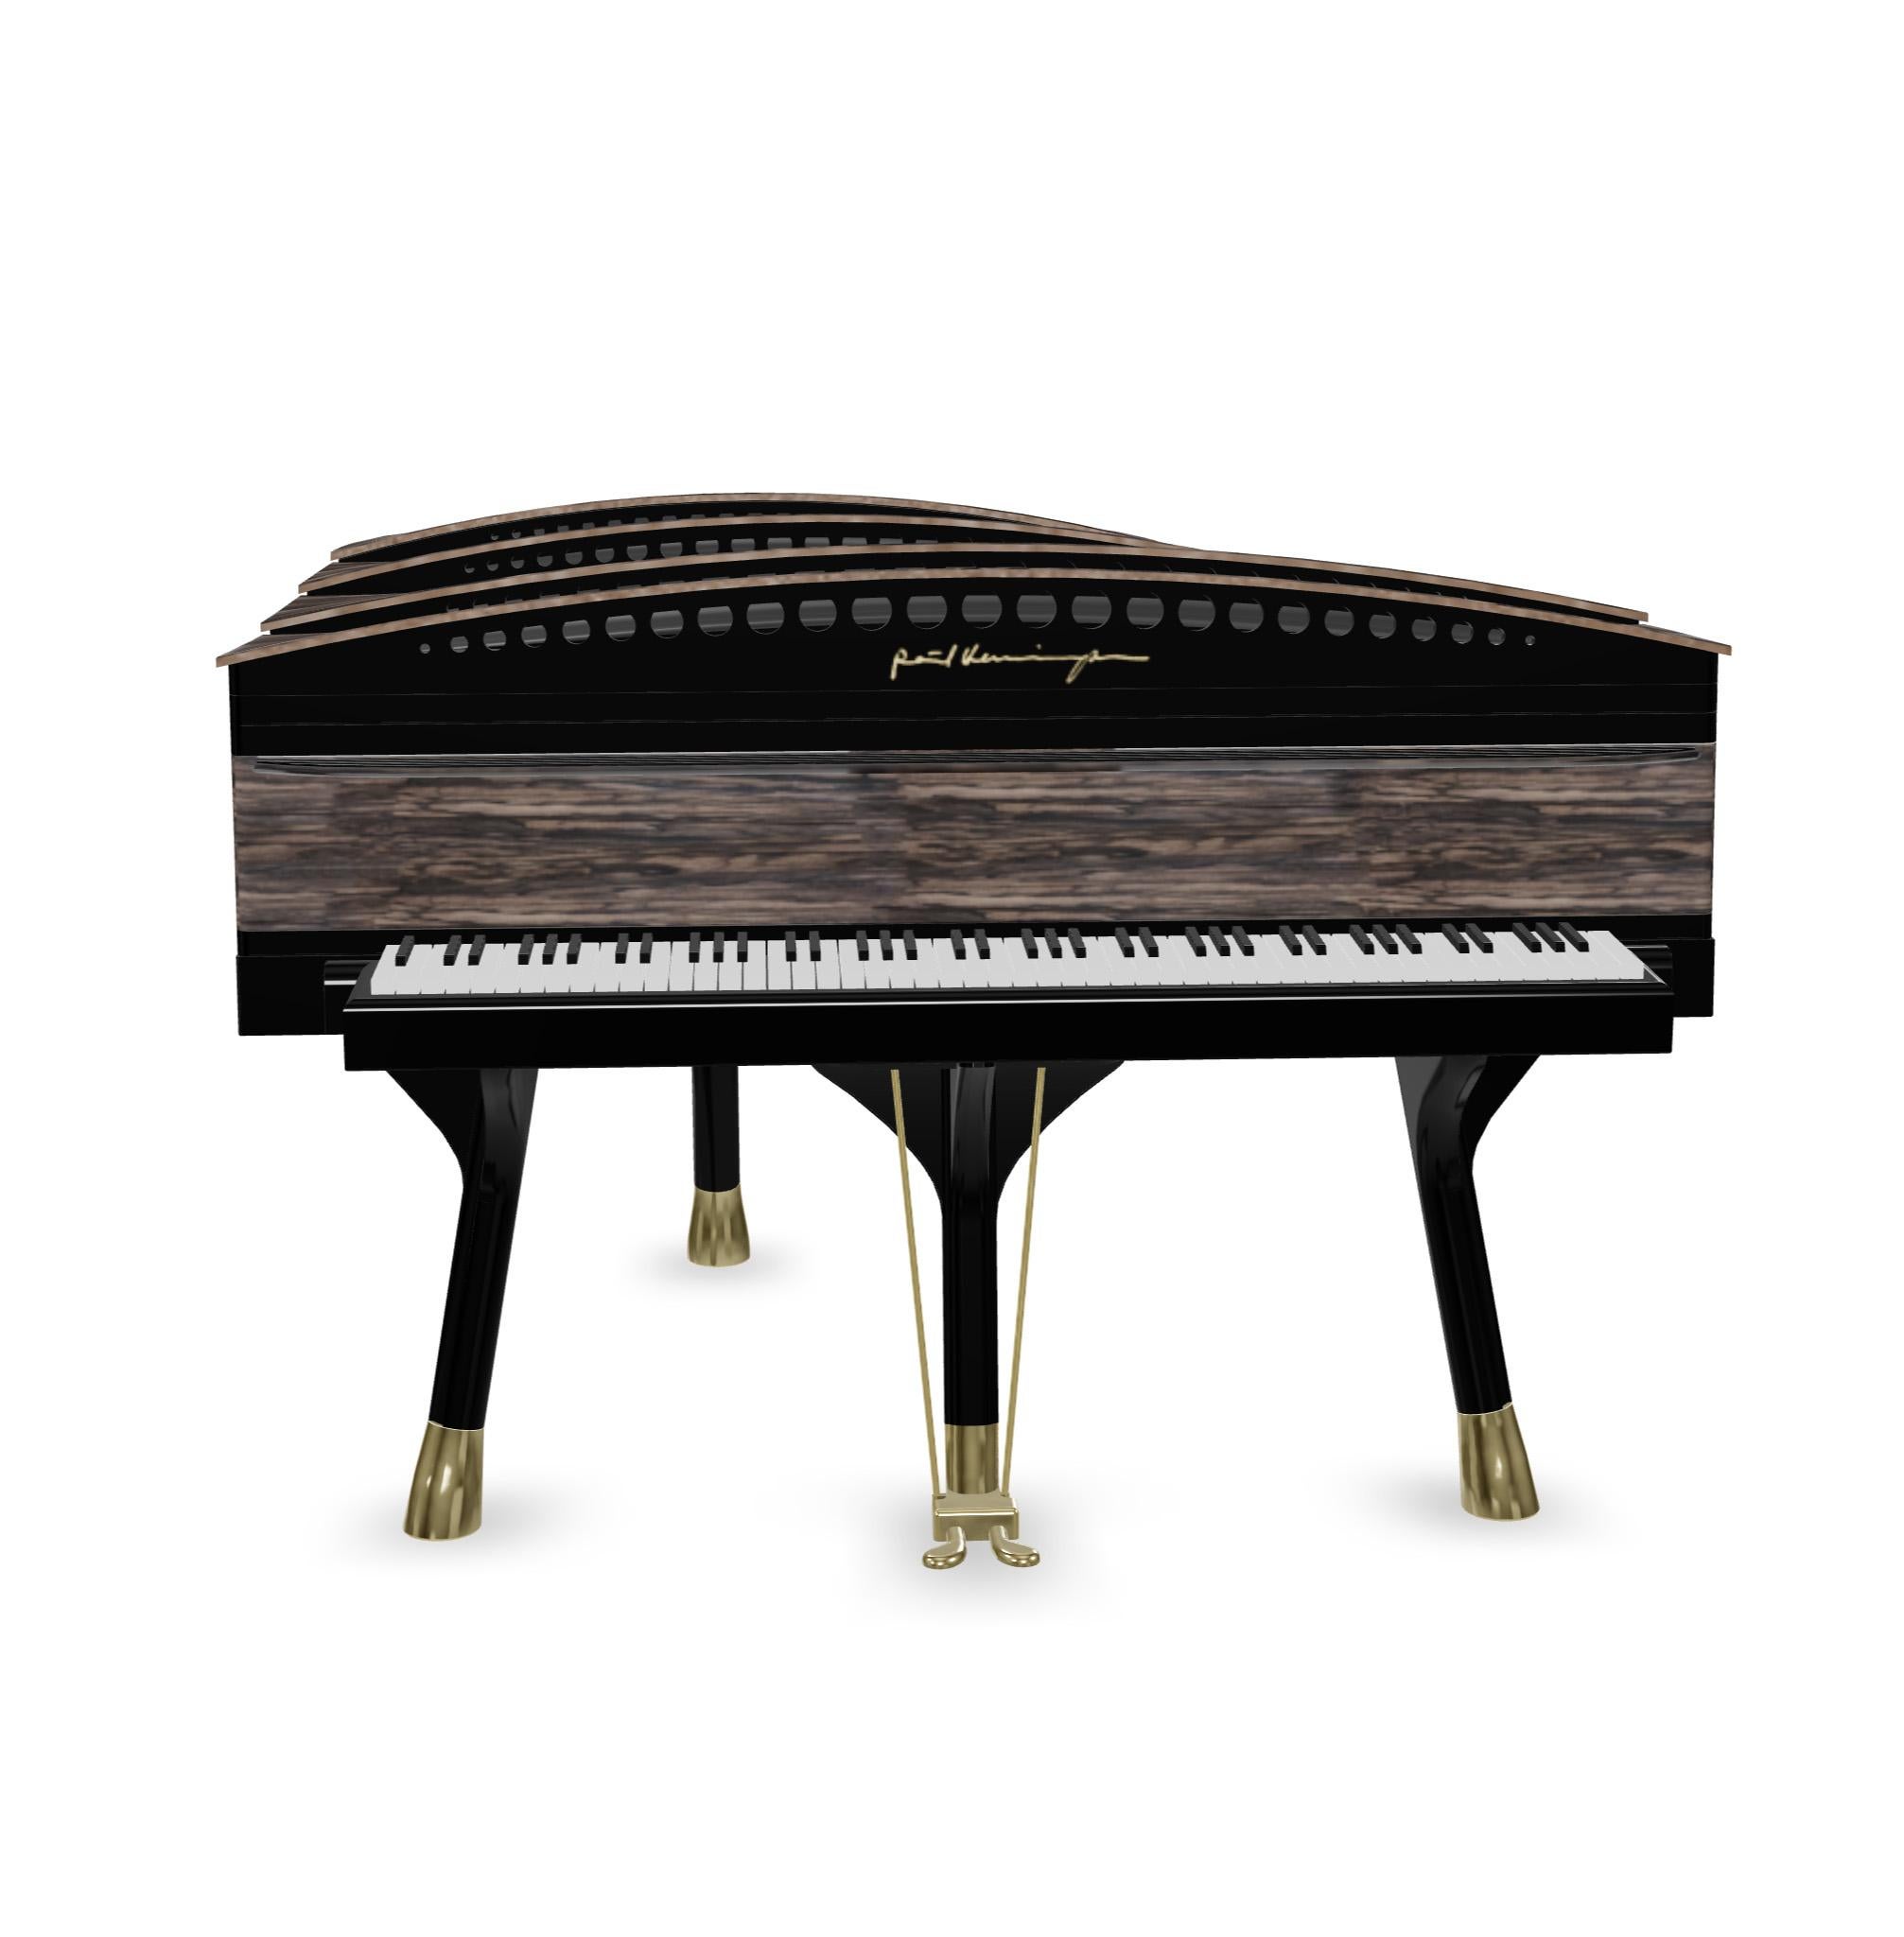 Danish PH180 Bow Grand Piano in Macassar Wood with Brass, Art-Case Piano For Sale